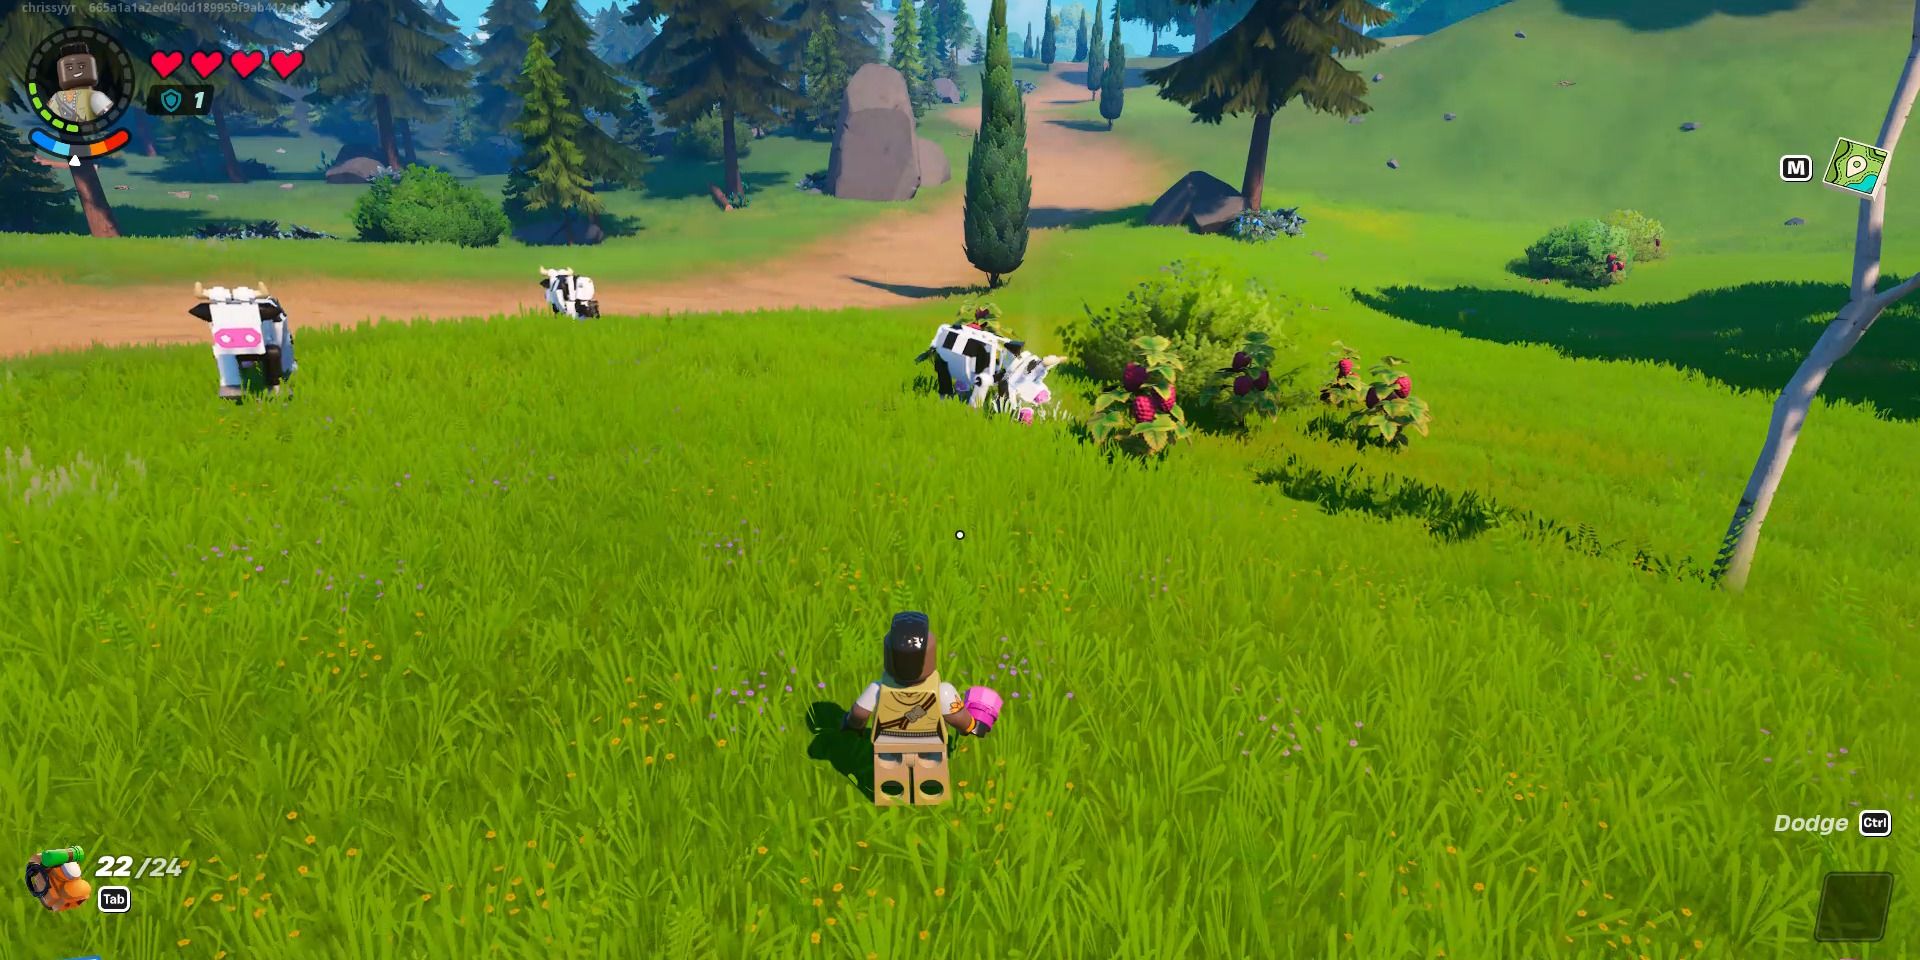 Image of a player in front of a group of cows in Lego Fortnite